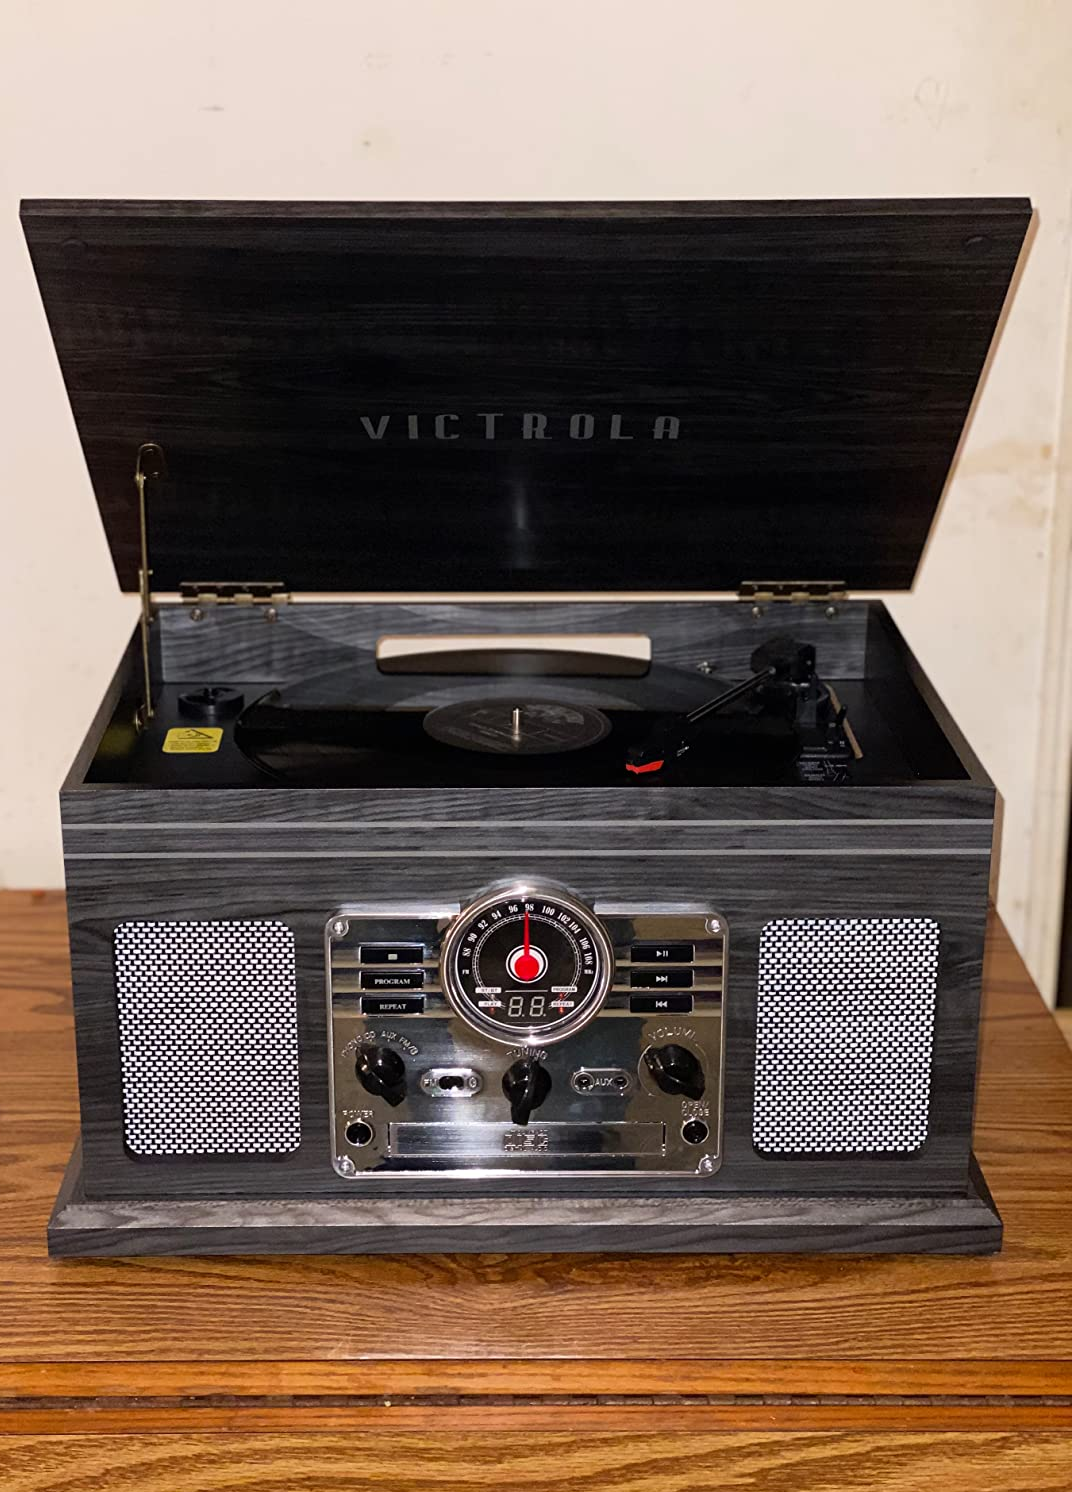 Reviewer image of gray and black vintage-inspired wooden turntable with custom buttons and three dials on the front and black vinyl and needle on it, sitting atop brown wooden table